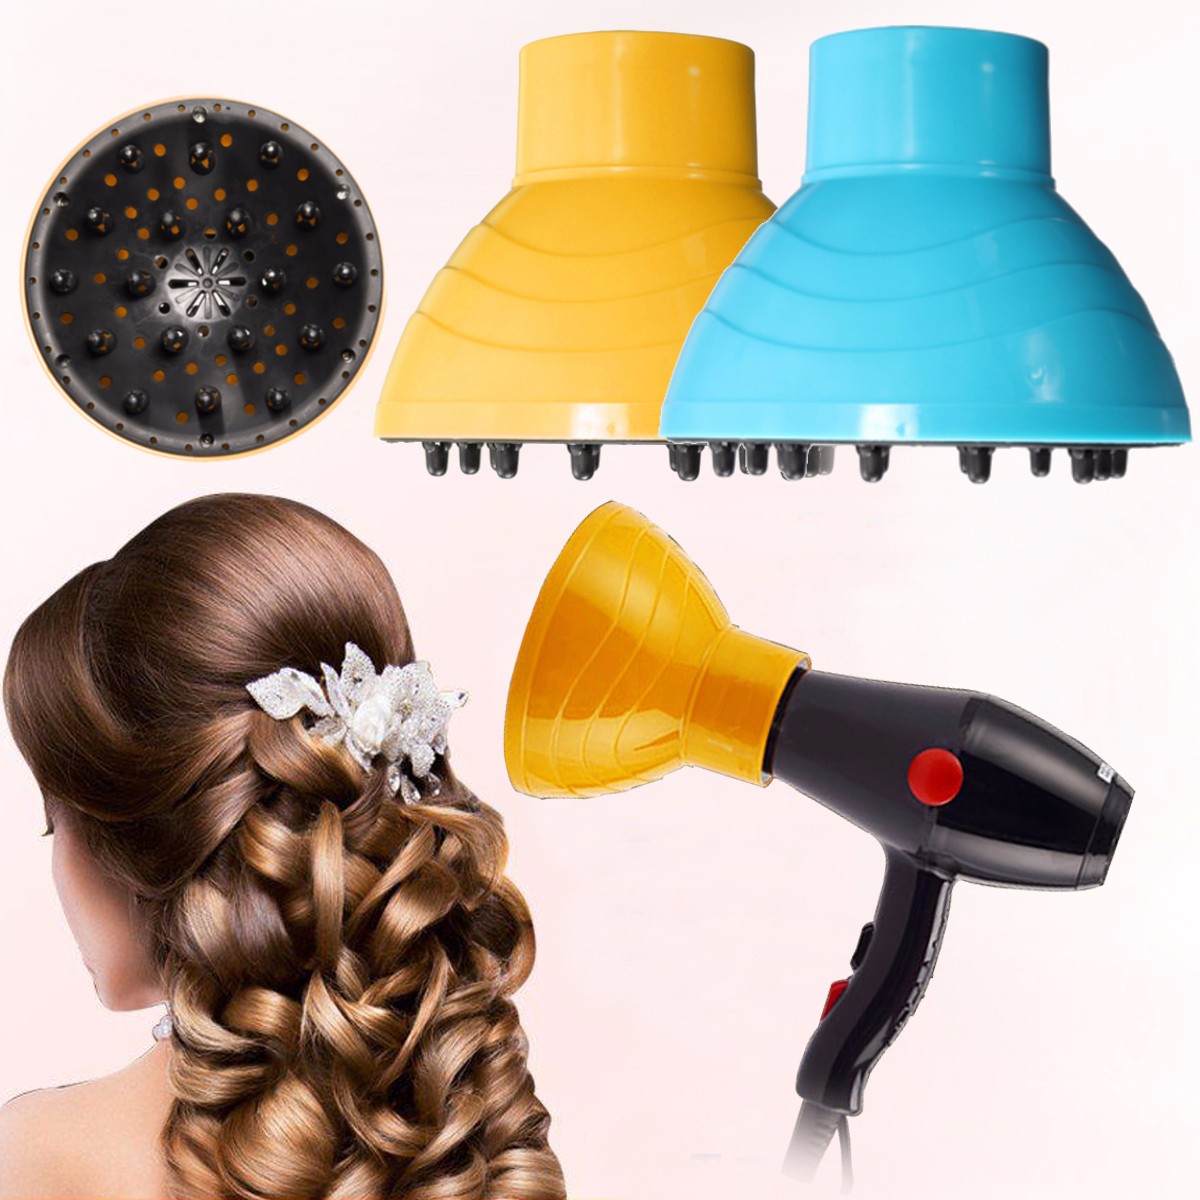 

Hair Dryer Blower Hairdressing Salon Curly Diffuser Tool Wavy Hairstyle